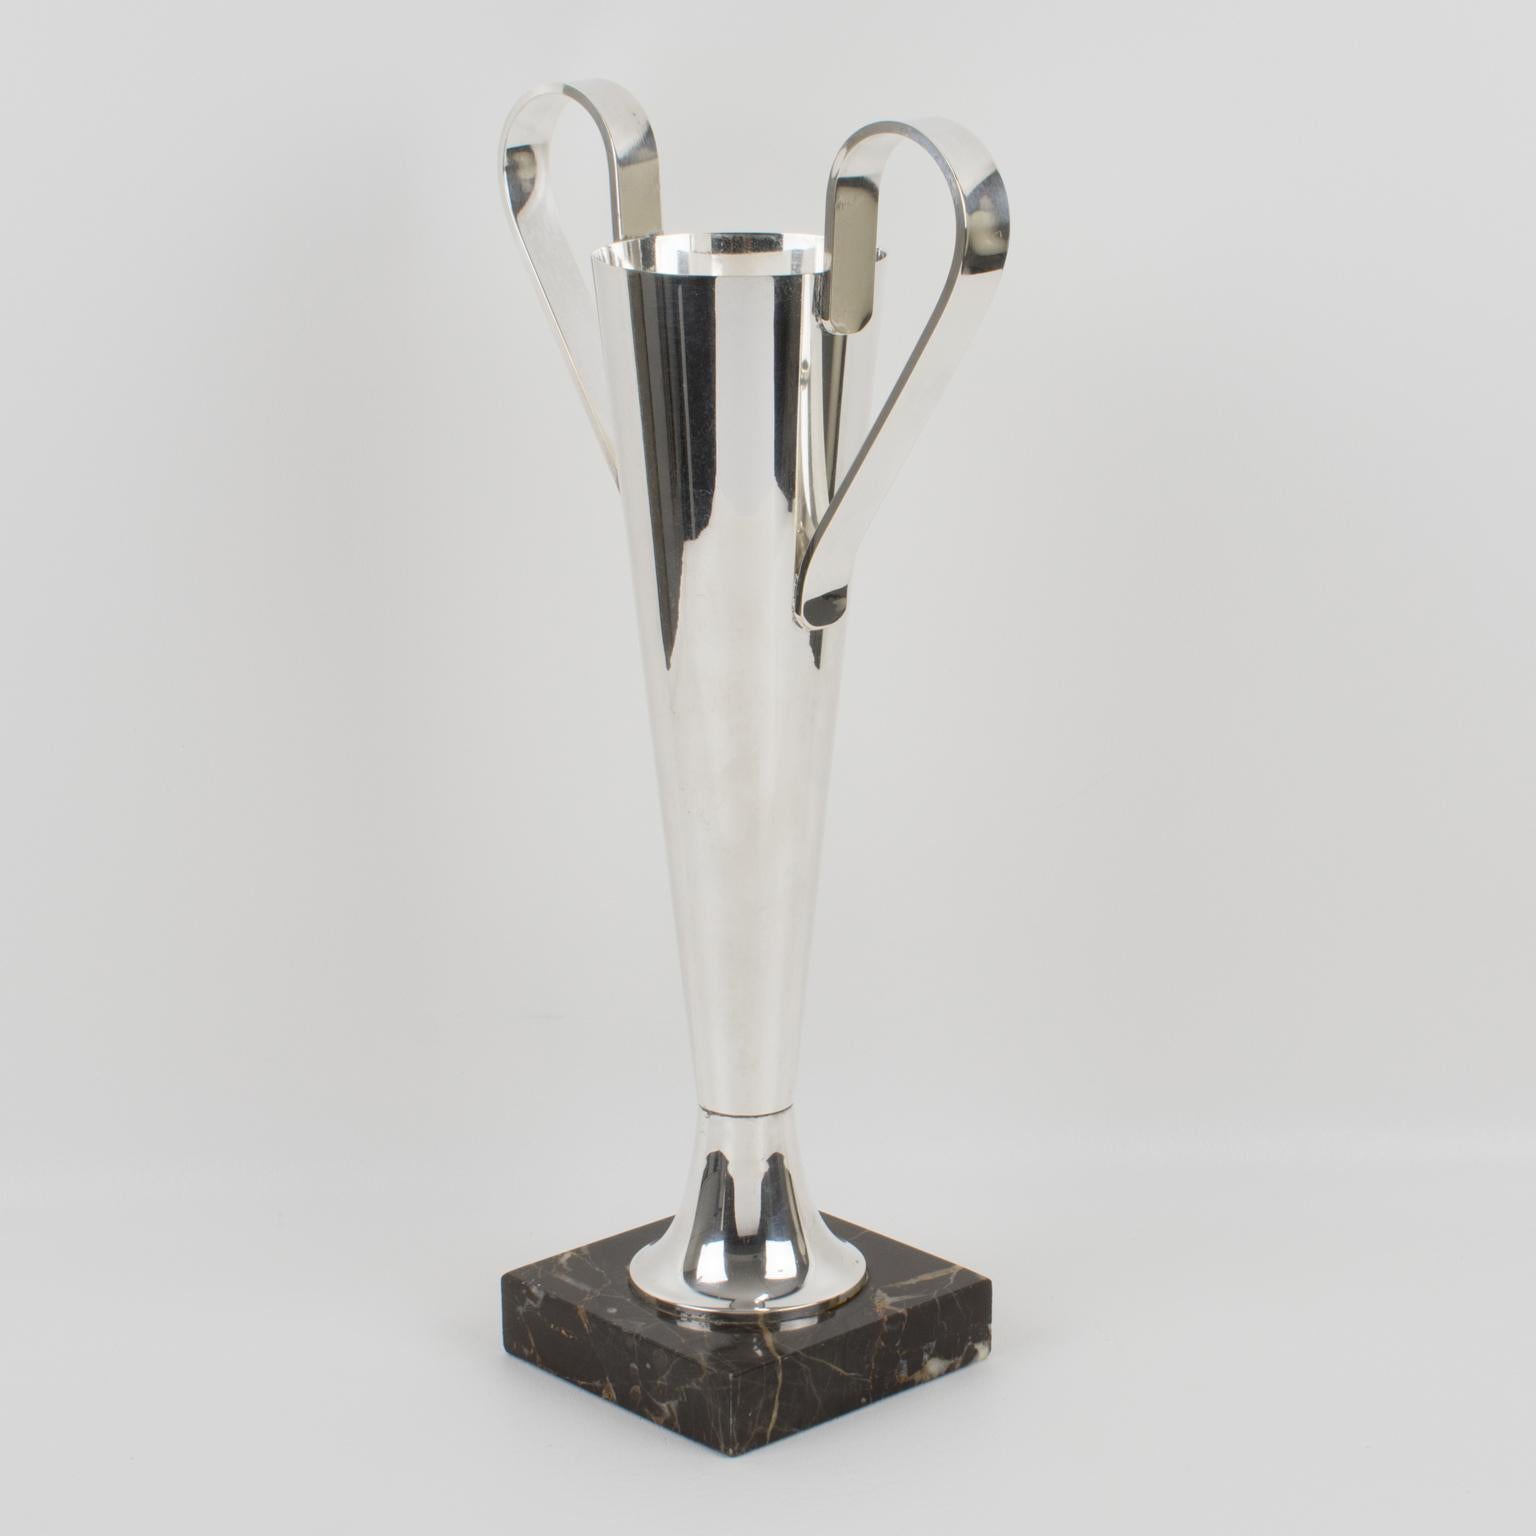 Mid-20th Century French Art Deco Tall Silver Plate Vase with Handles on Marble Base, 1930s